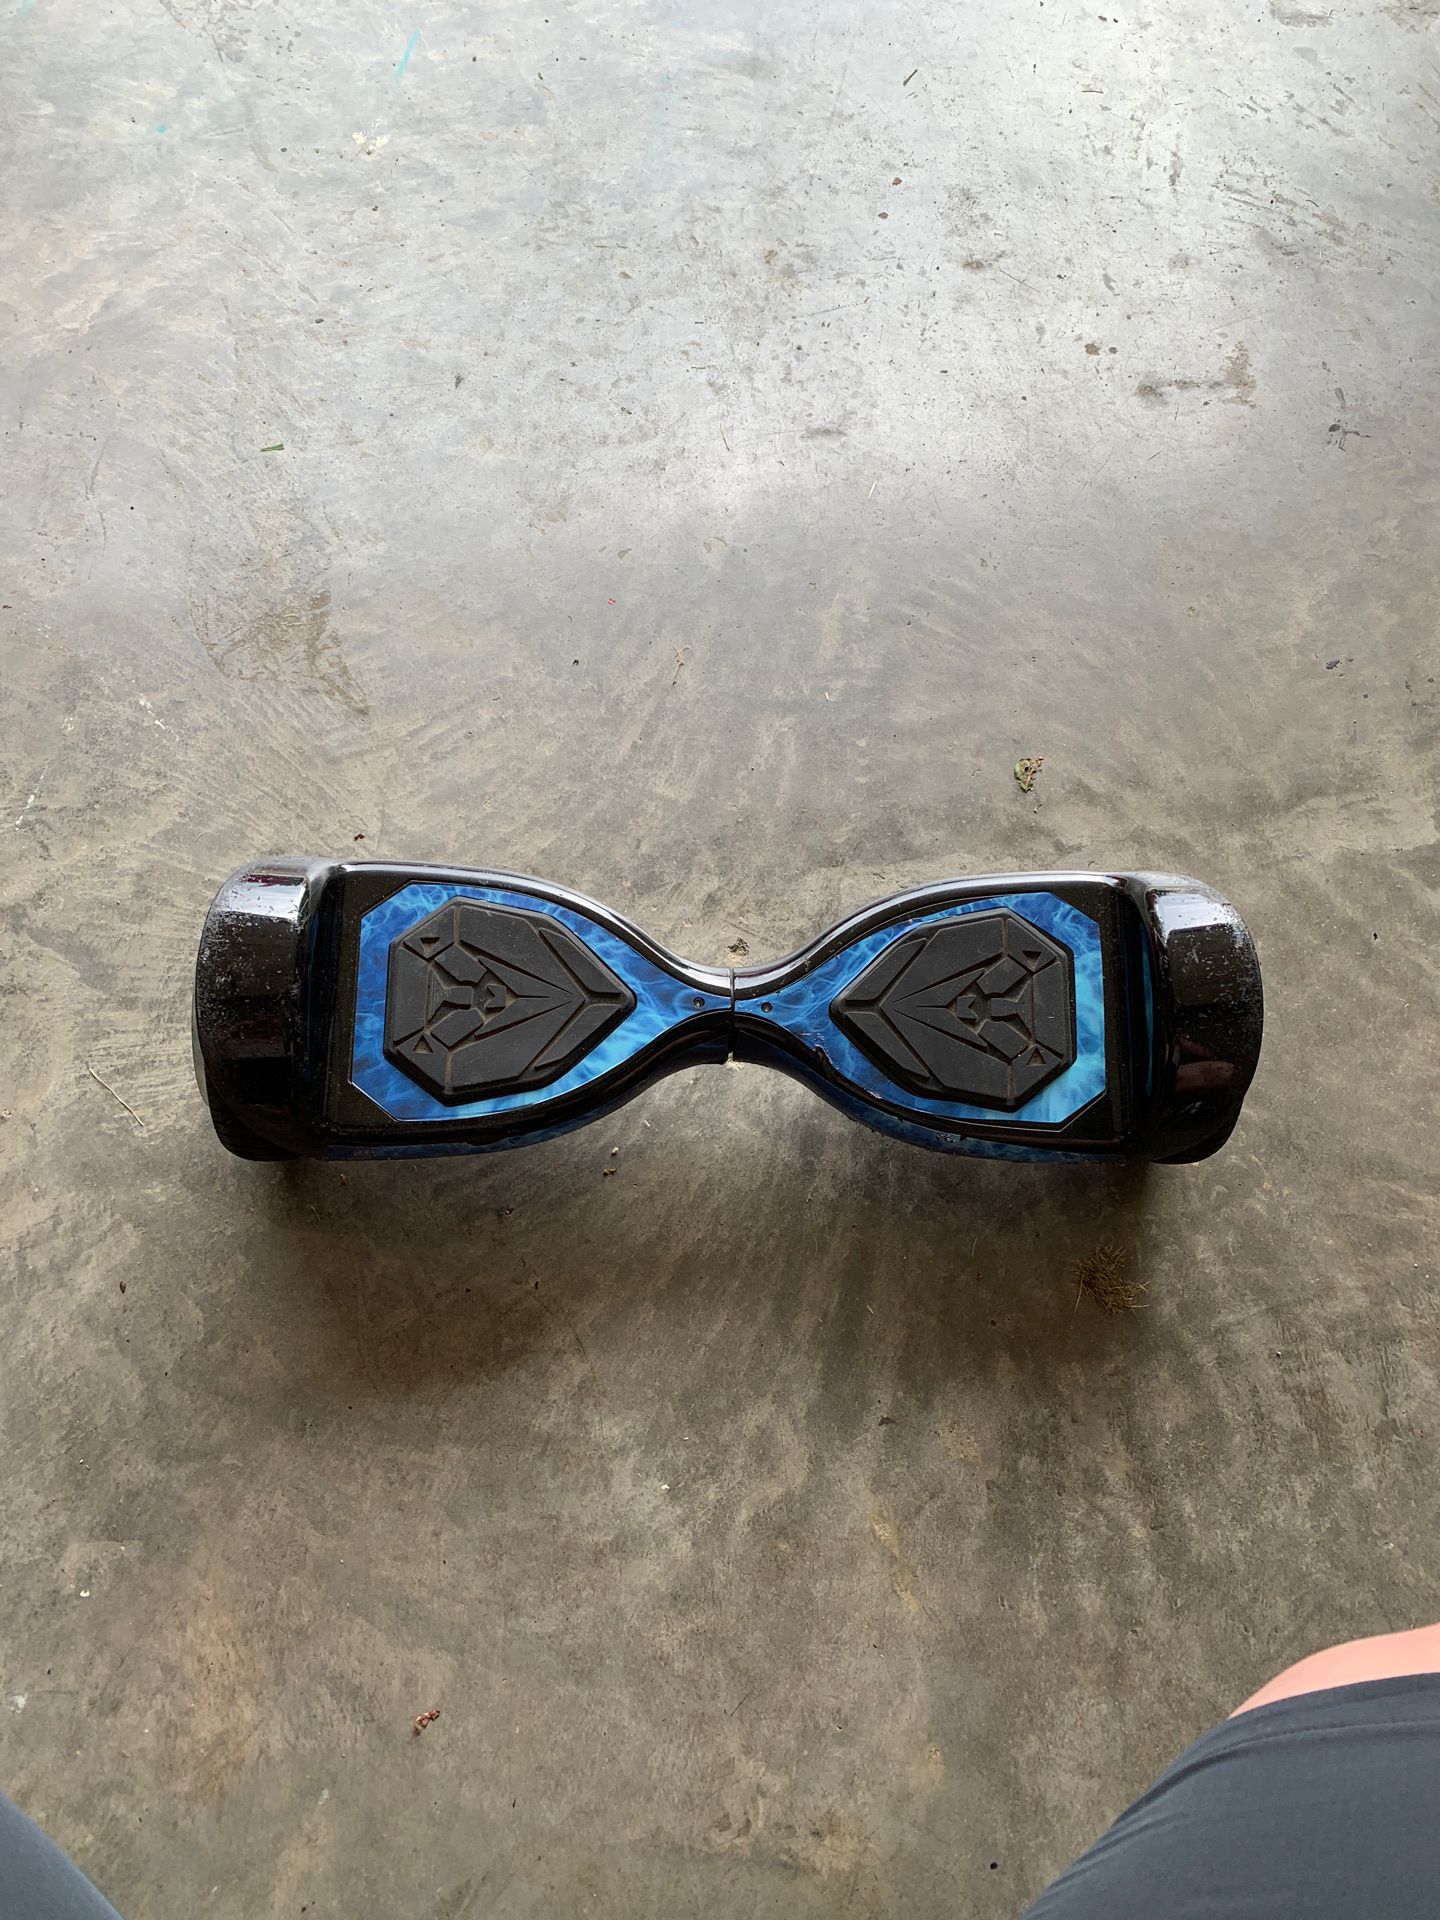 Swagtron hover board